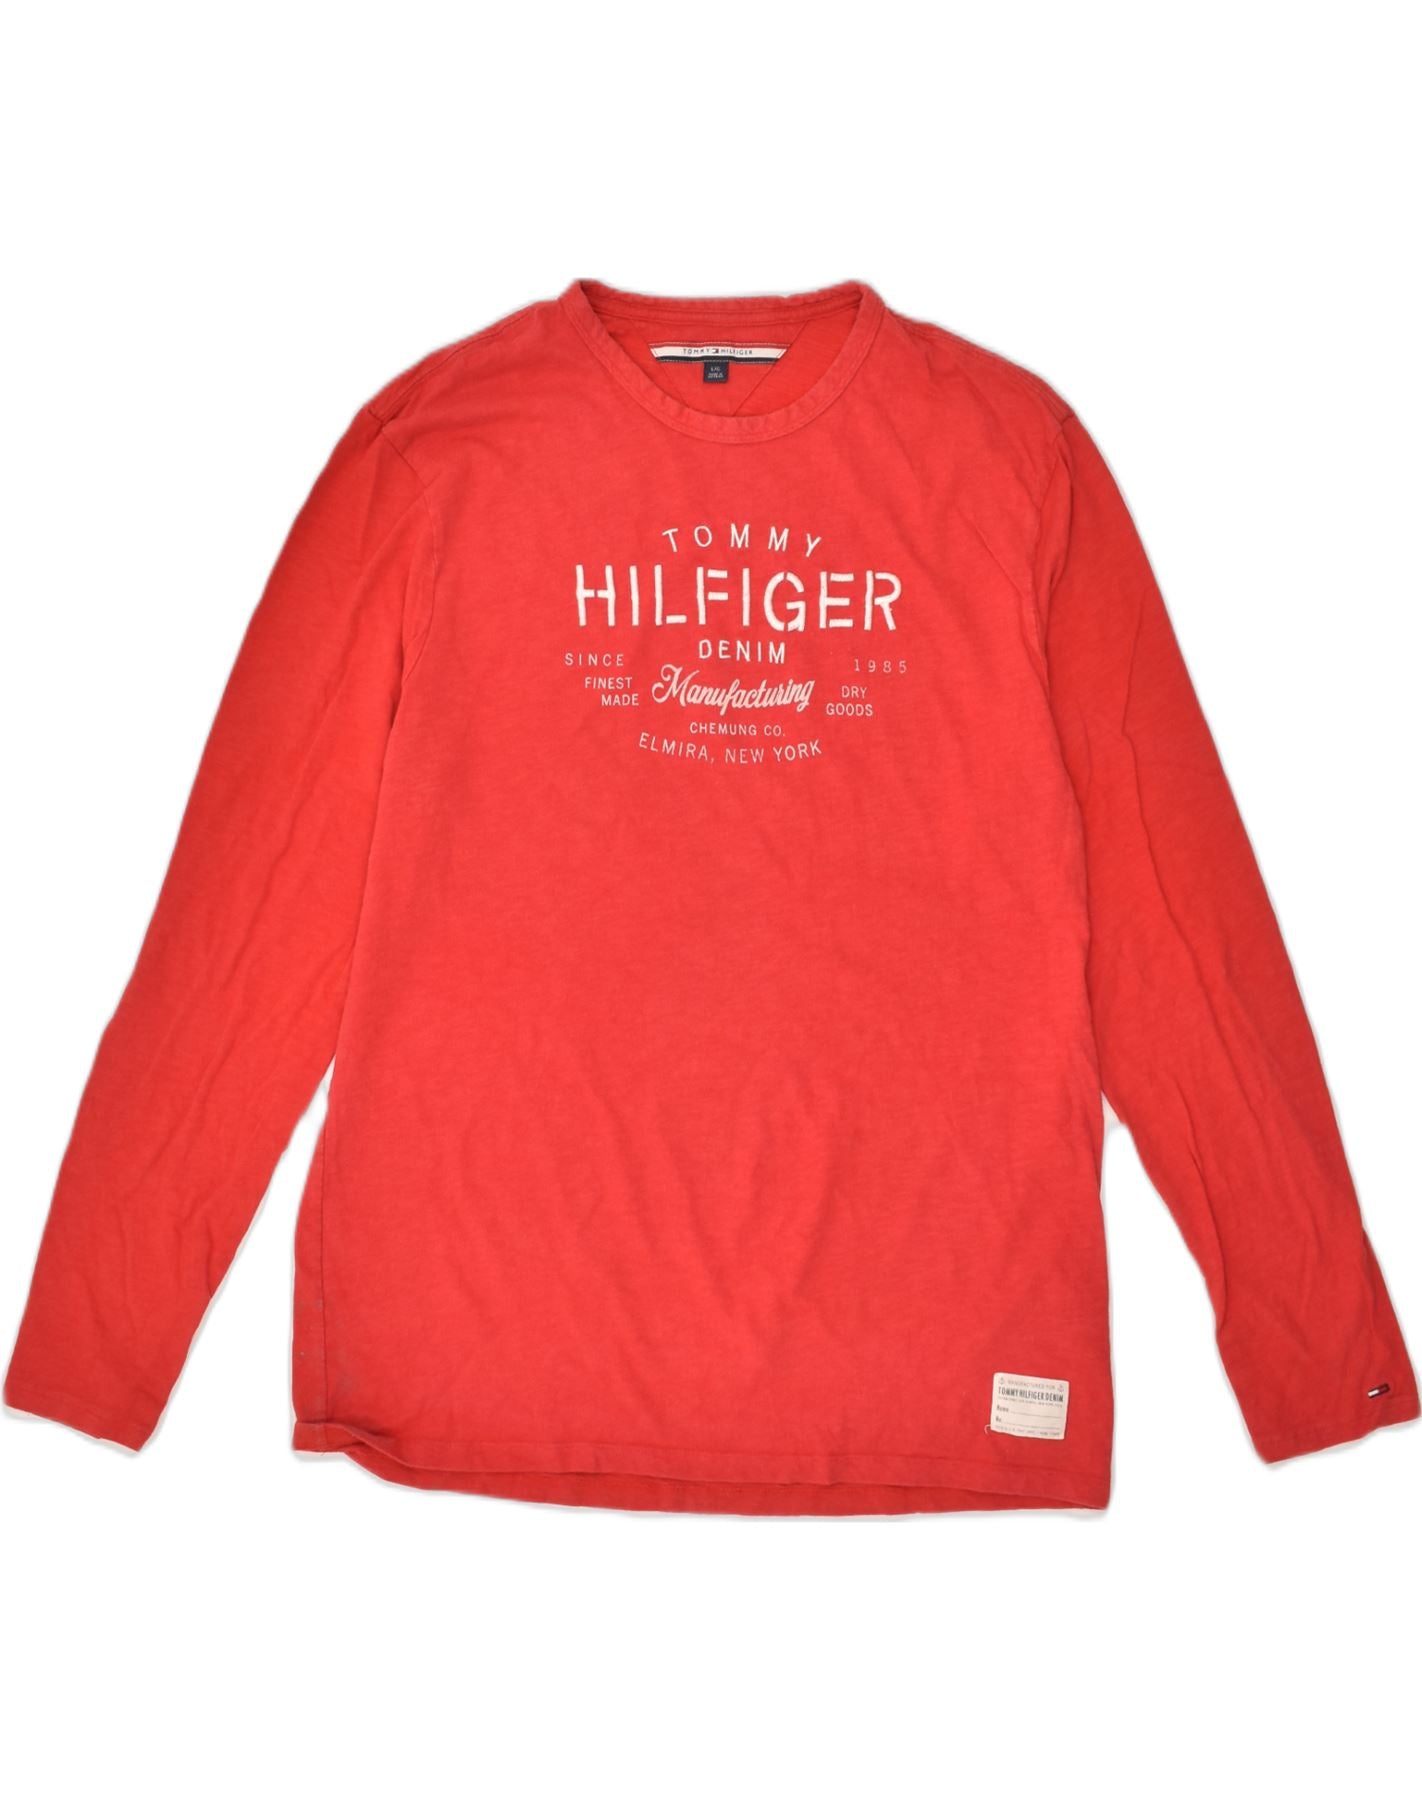 TOMMY HILFIGER Womens Graphic Top Long Sleeve UK 16 Large Red Cotton, Vintage & Second-Hand Clothing Online